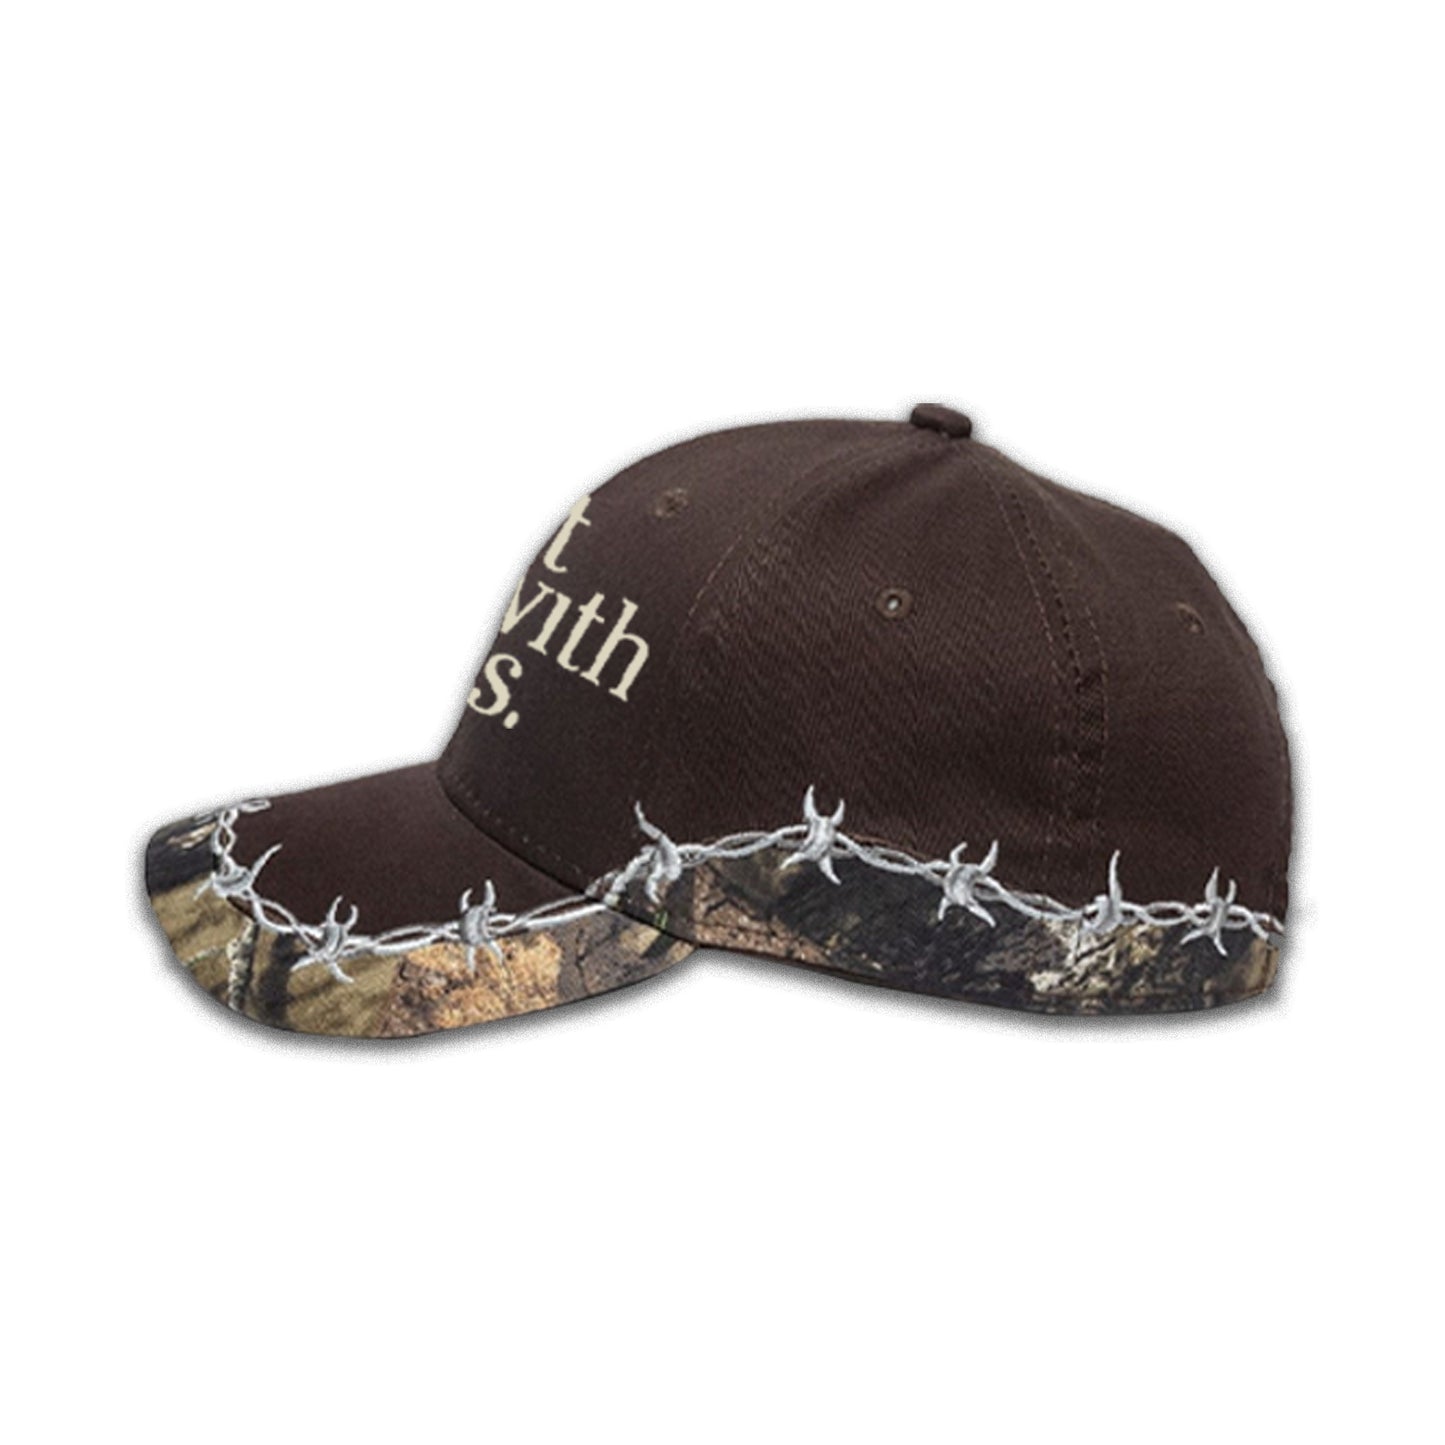 DMWT Barbed Wire Hat